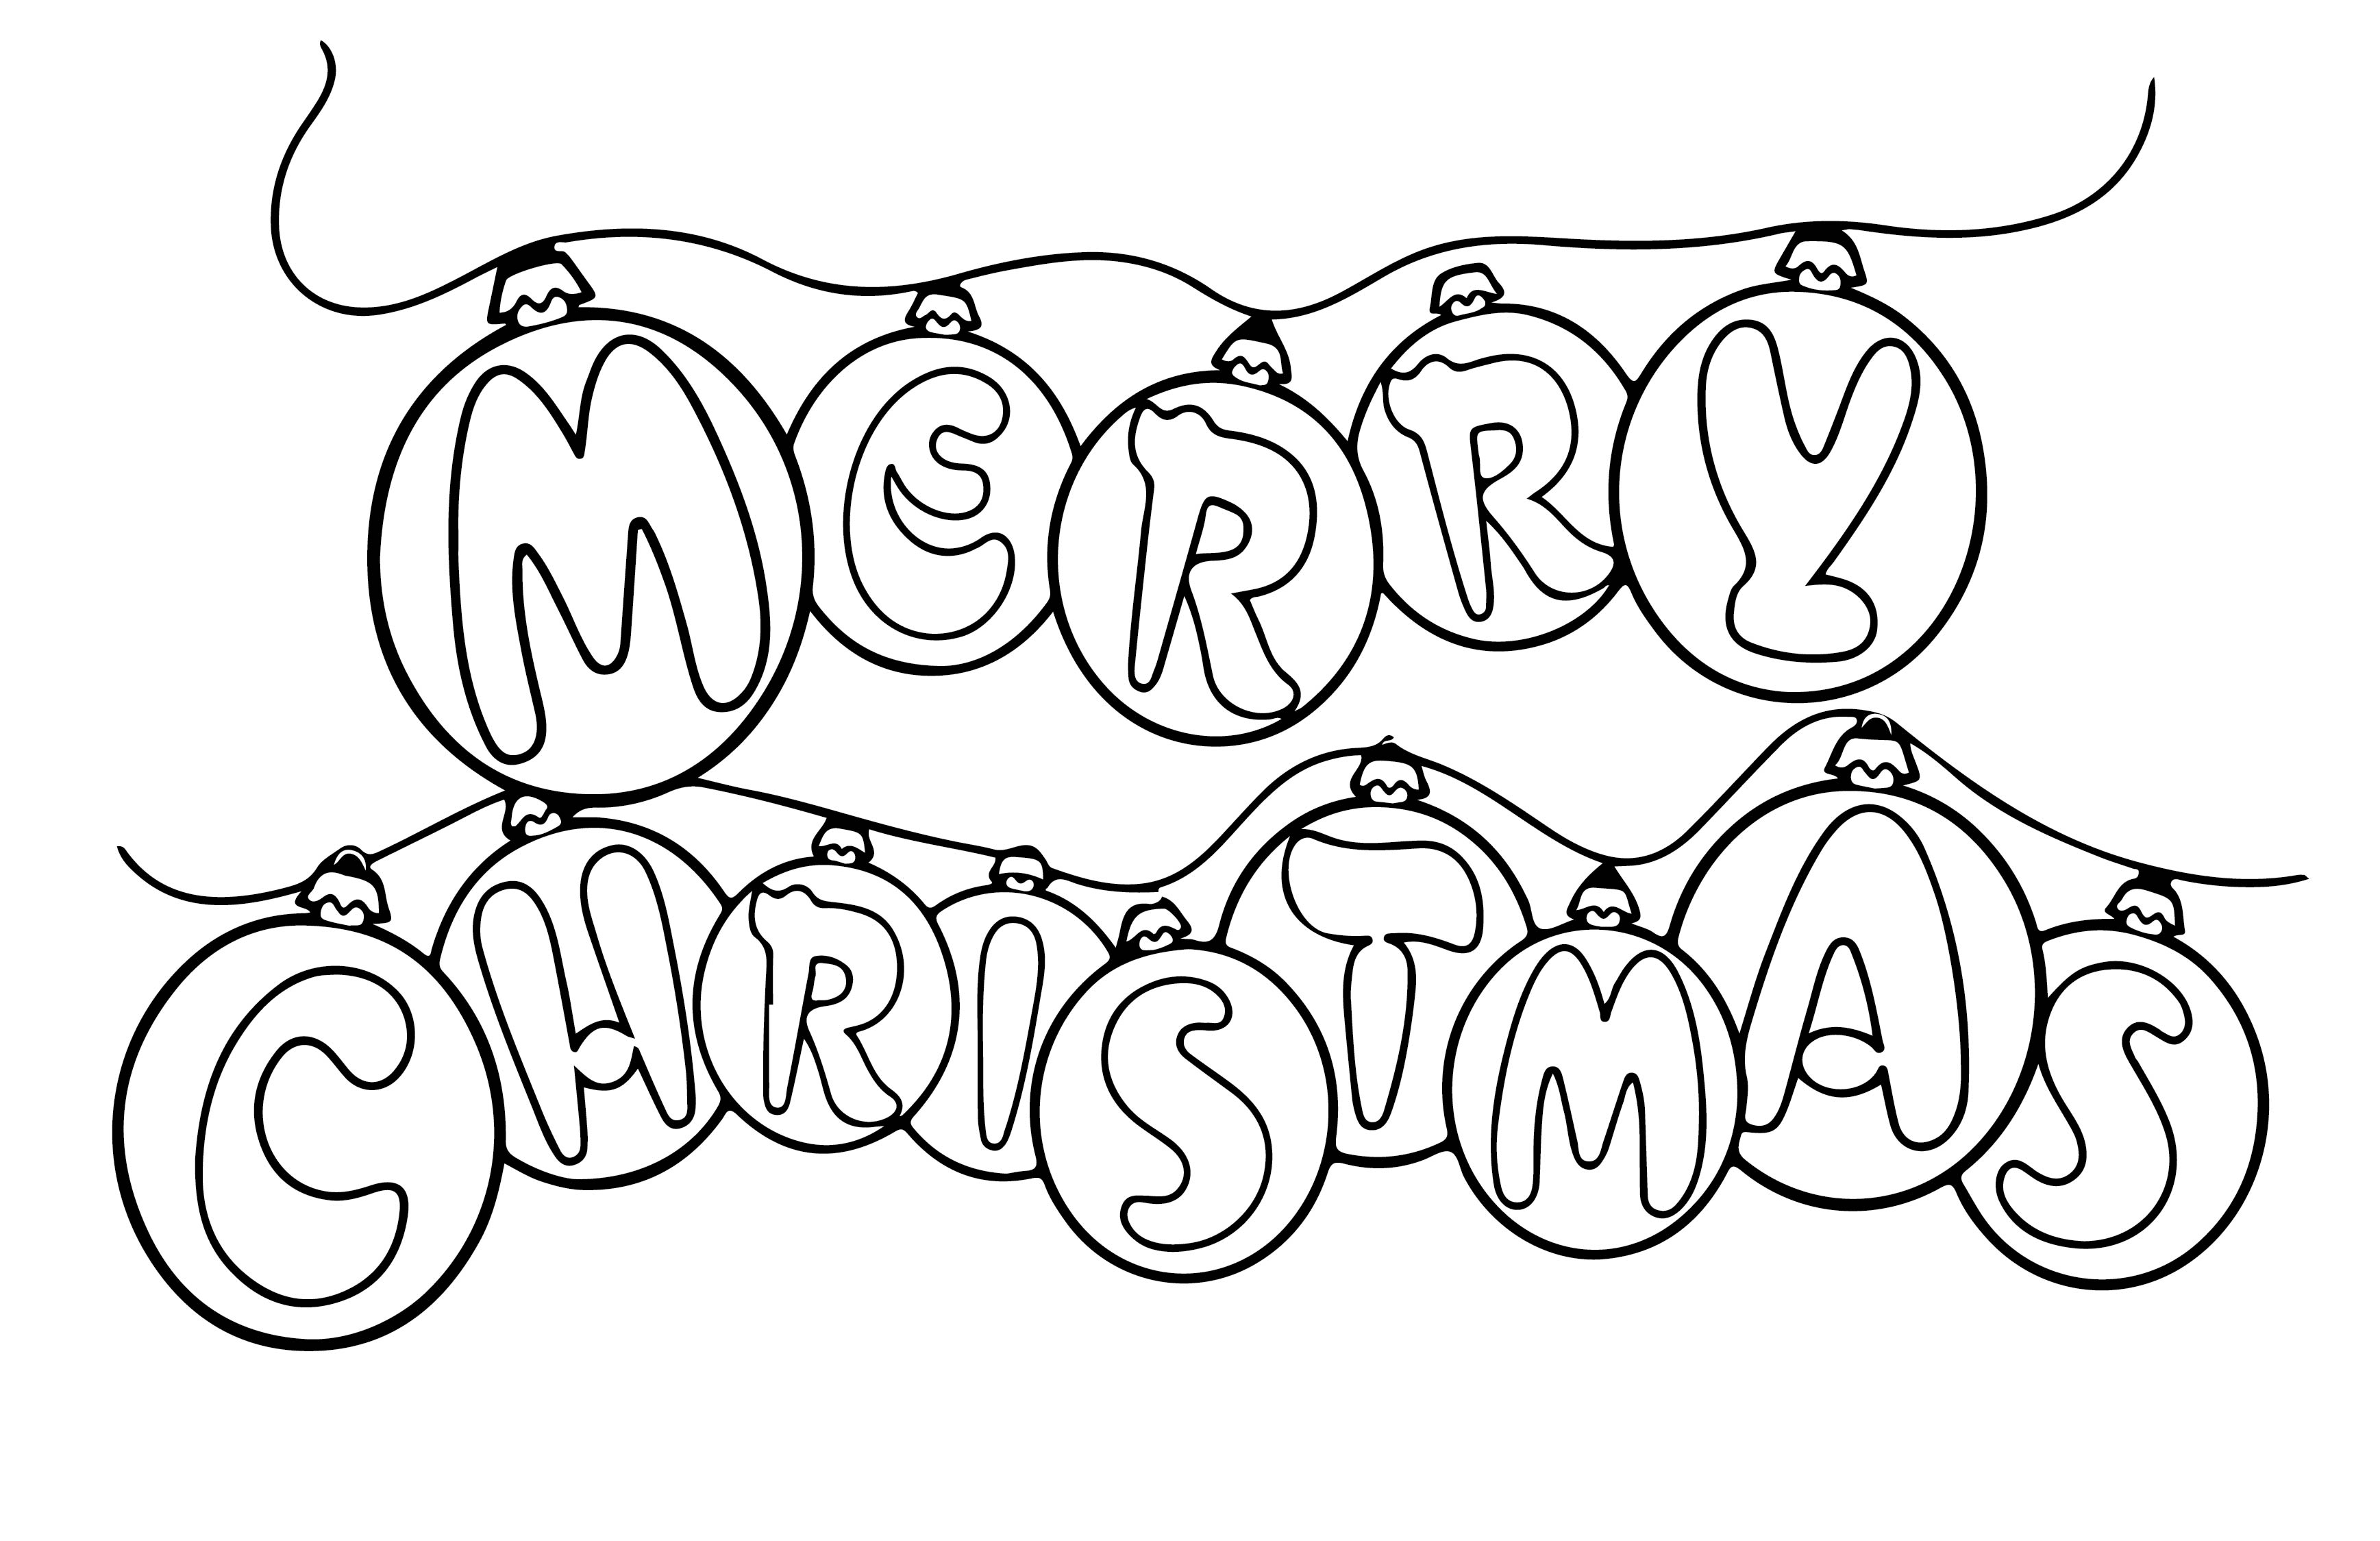 christmas-printable-images-gallery-category-page-6-printablee